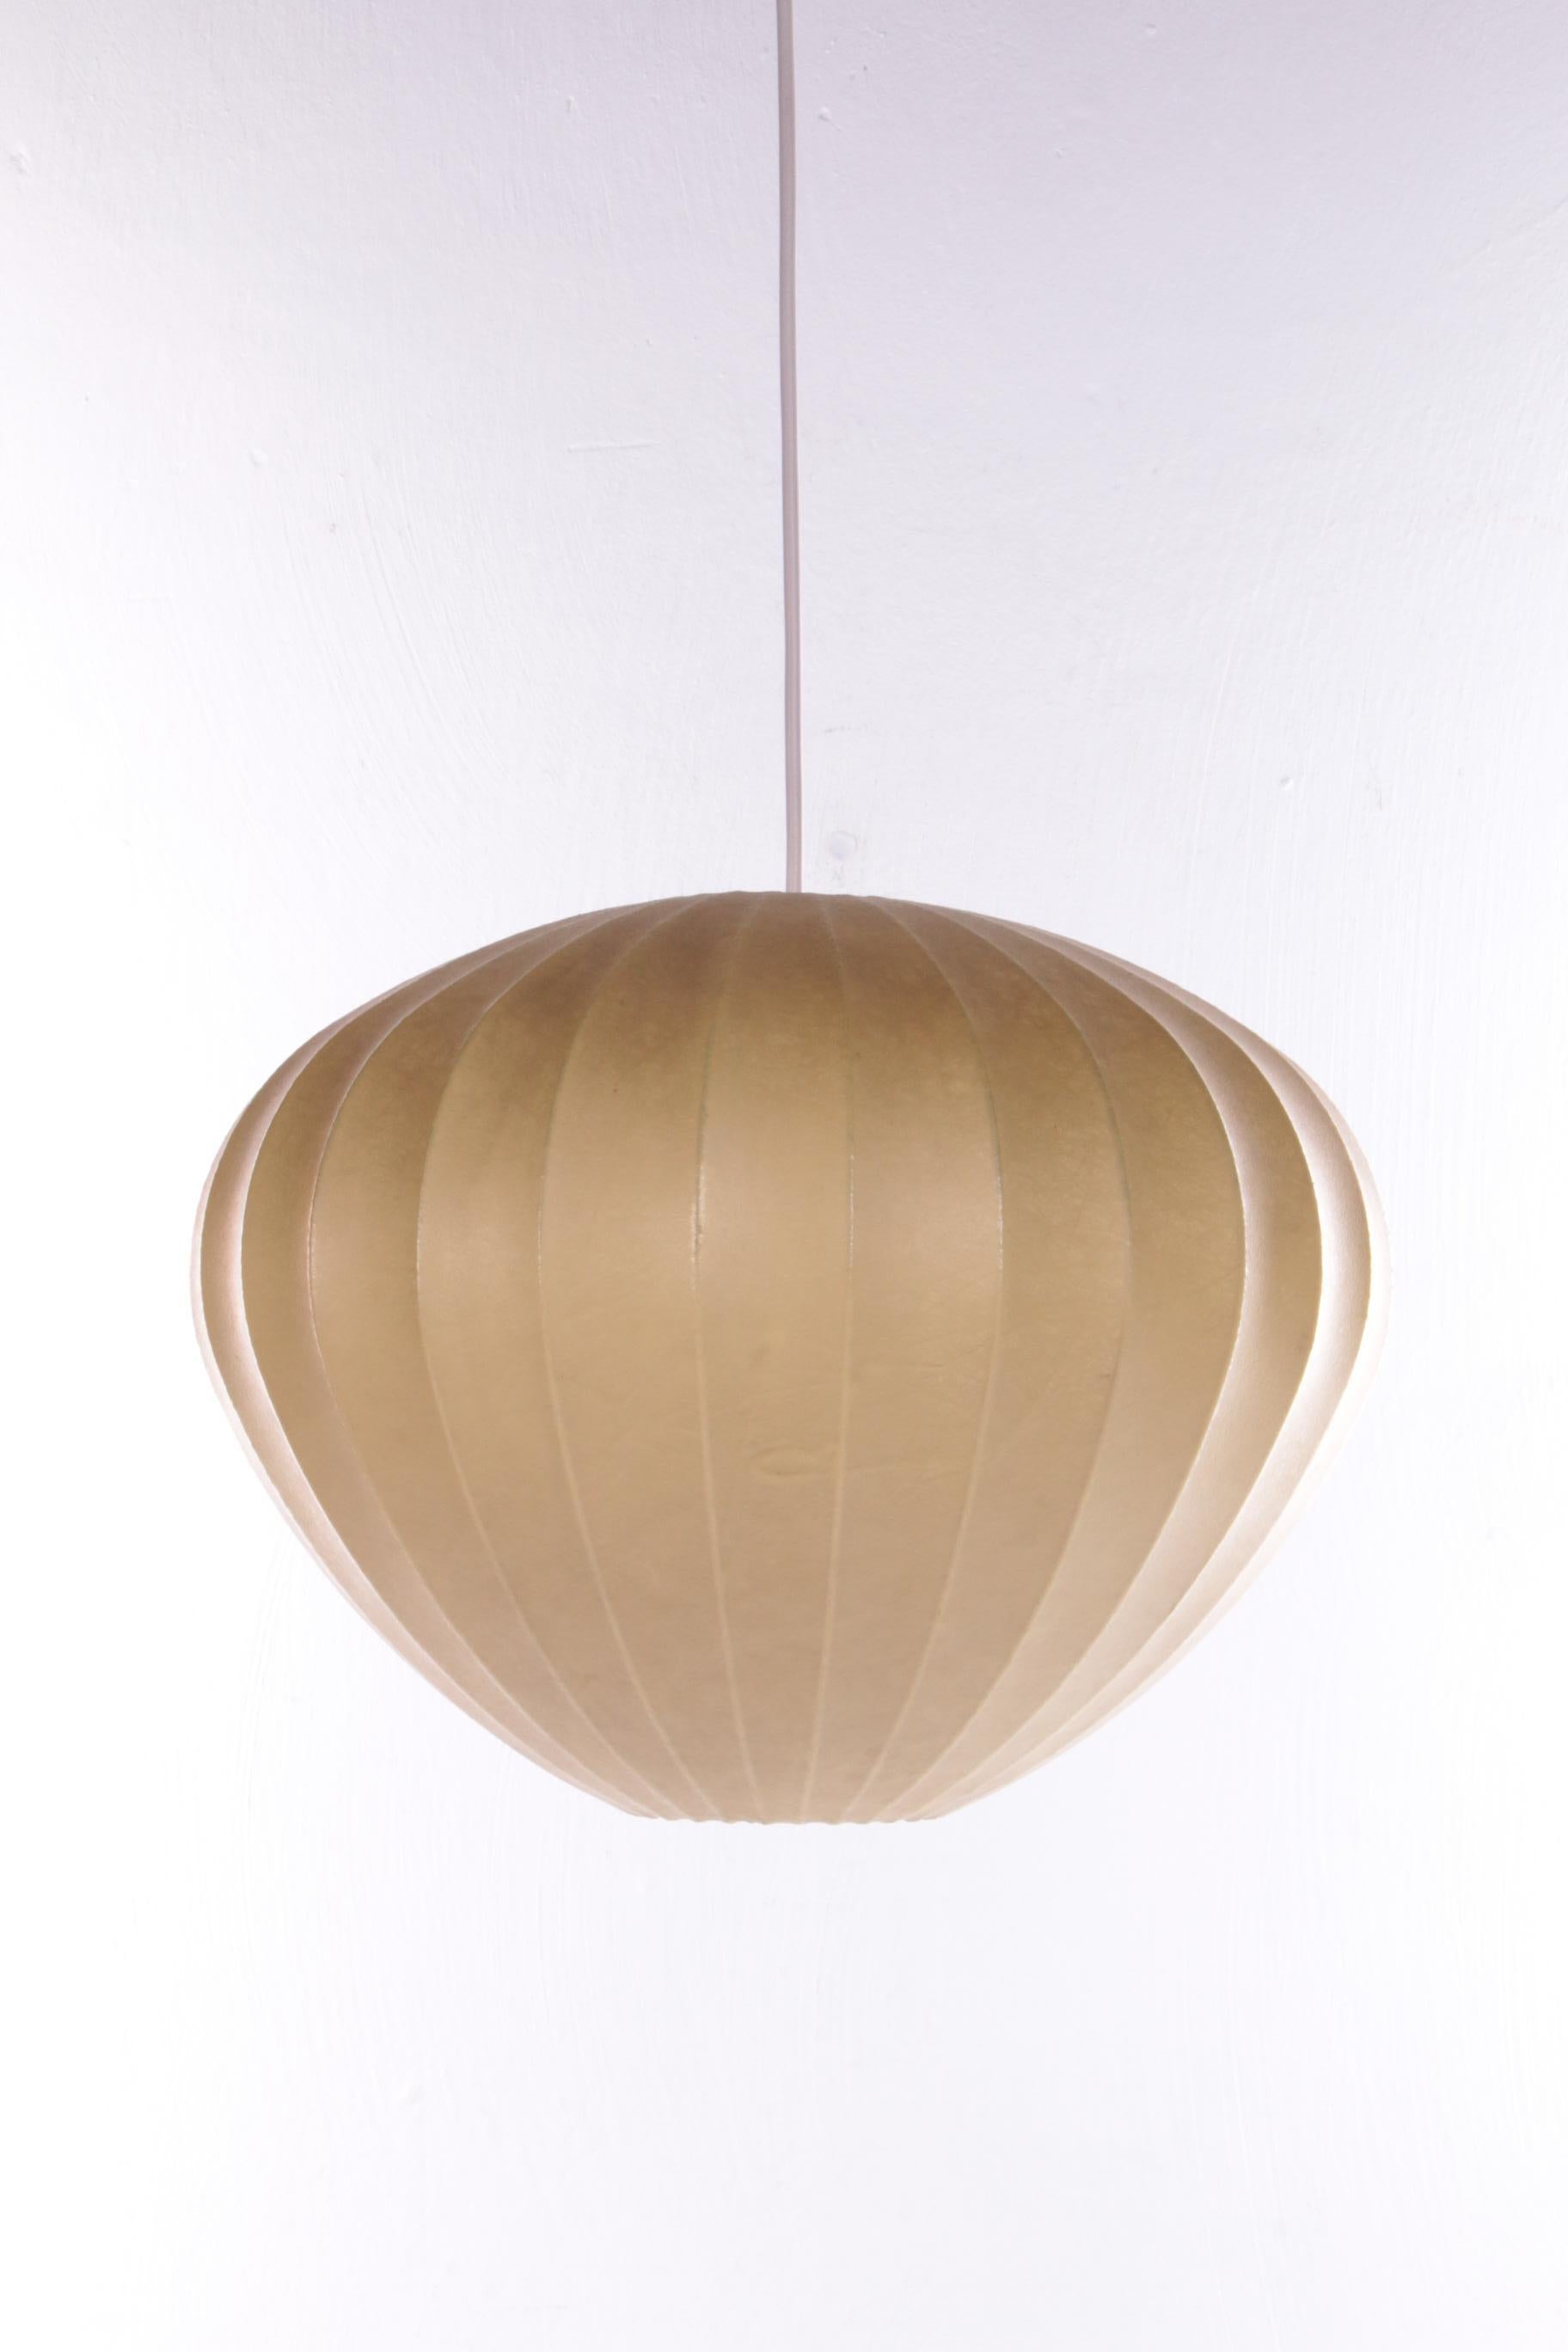 Cocoon pendant lamp by Achille Castiglioni for Flos

This is a beautiful bulb lamp or
Cocoon pendant lamp by A.C. for Flos
The main feature of this iconic pendant lamp by architect C. is the new material used to make it. The frame is metal